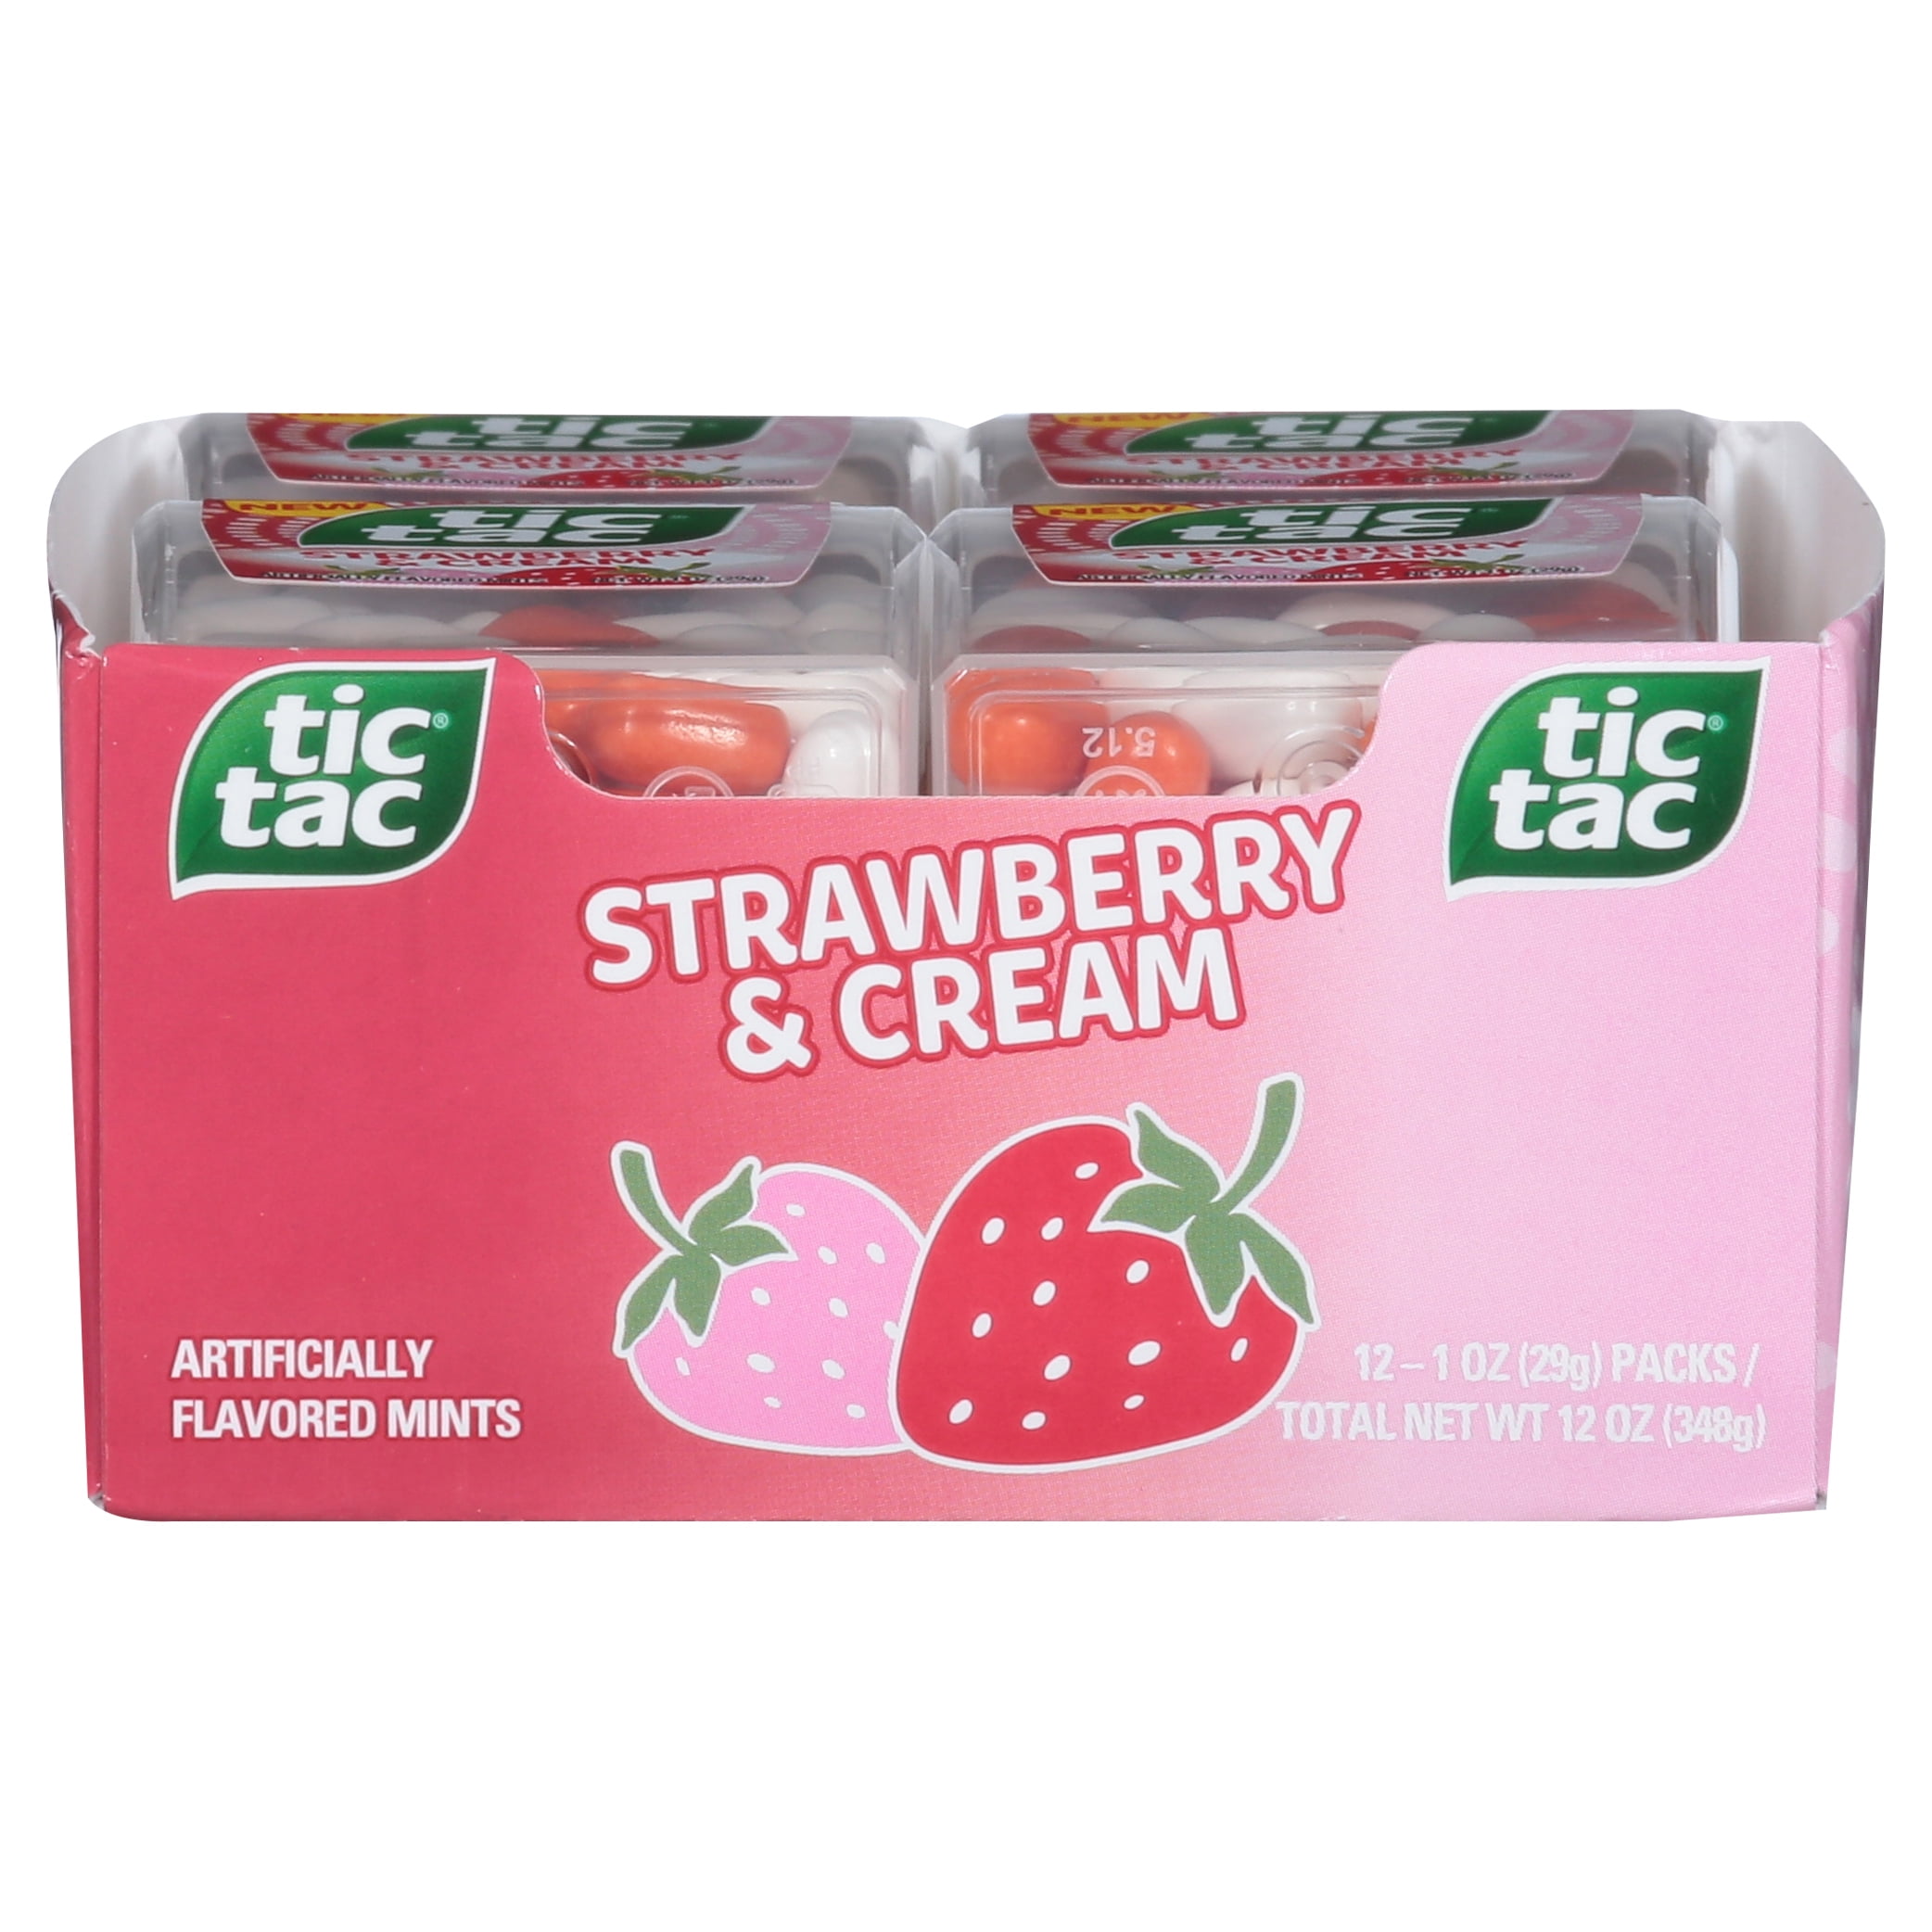 Snackivore Tic Tacs Fruit Variety Pack, 5 x 1oz Mini Size Packs, Includes Orange, Berry, Strawberry & Cream, Convenient for On-The-Go